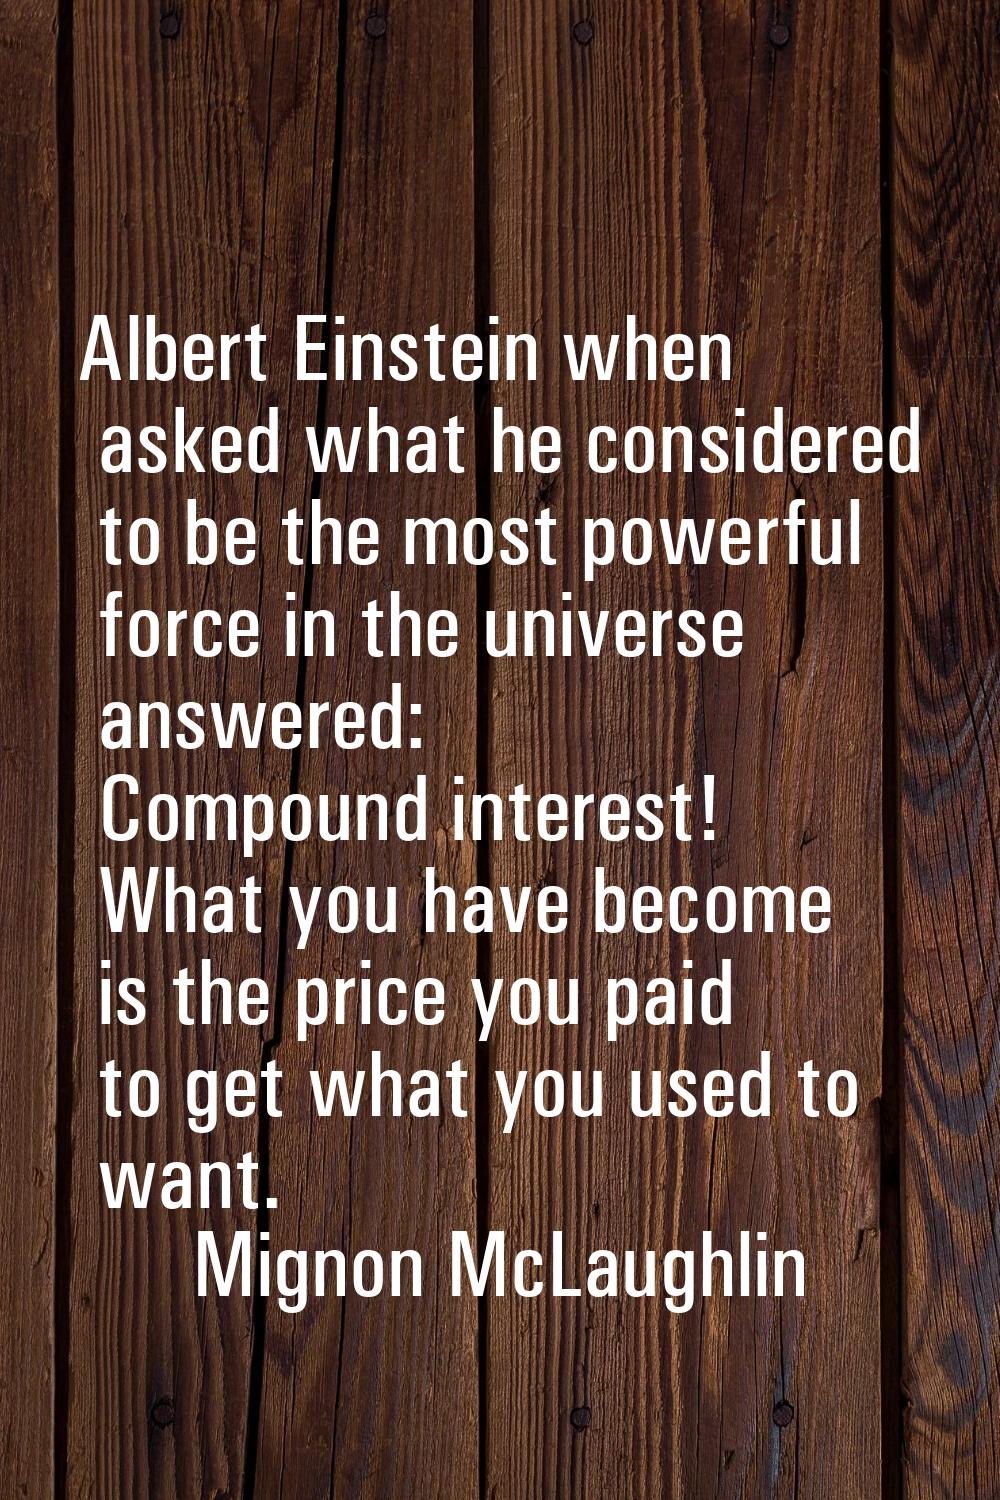 Albert Einstein when asked what he considered to be the most powerful force in the universe answere